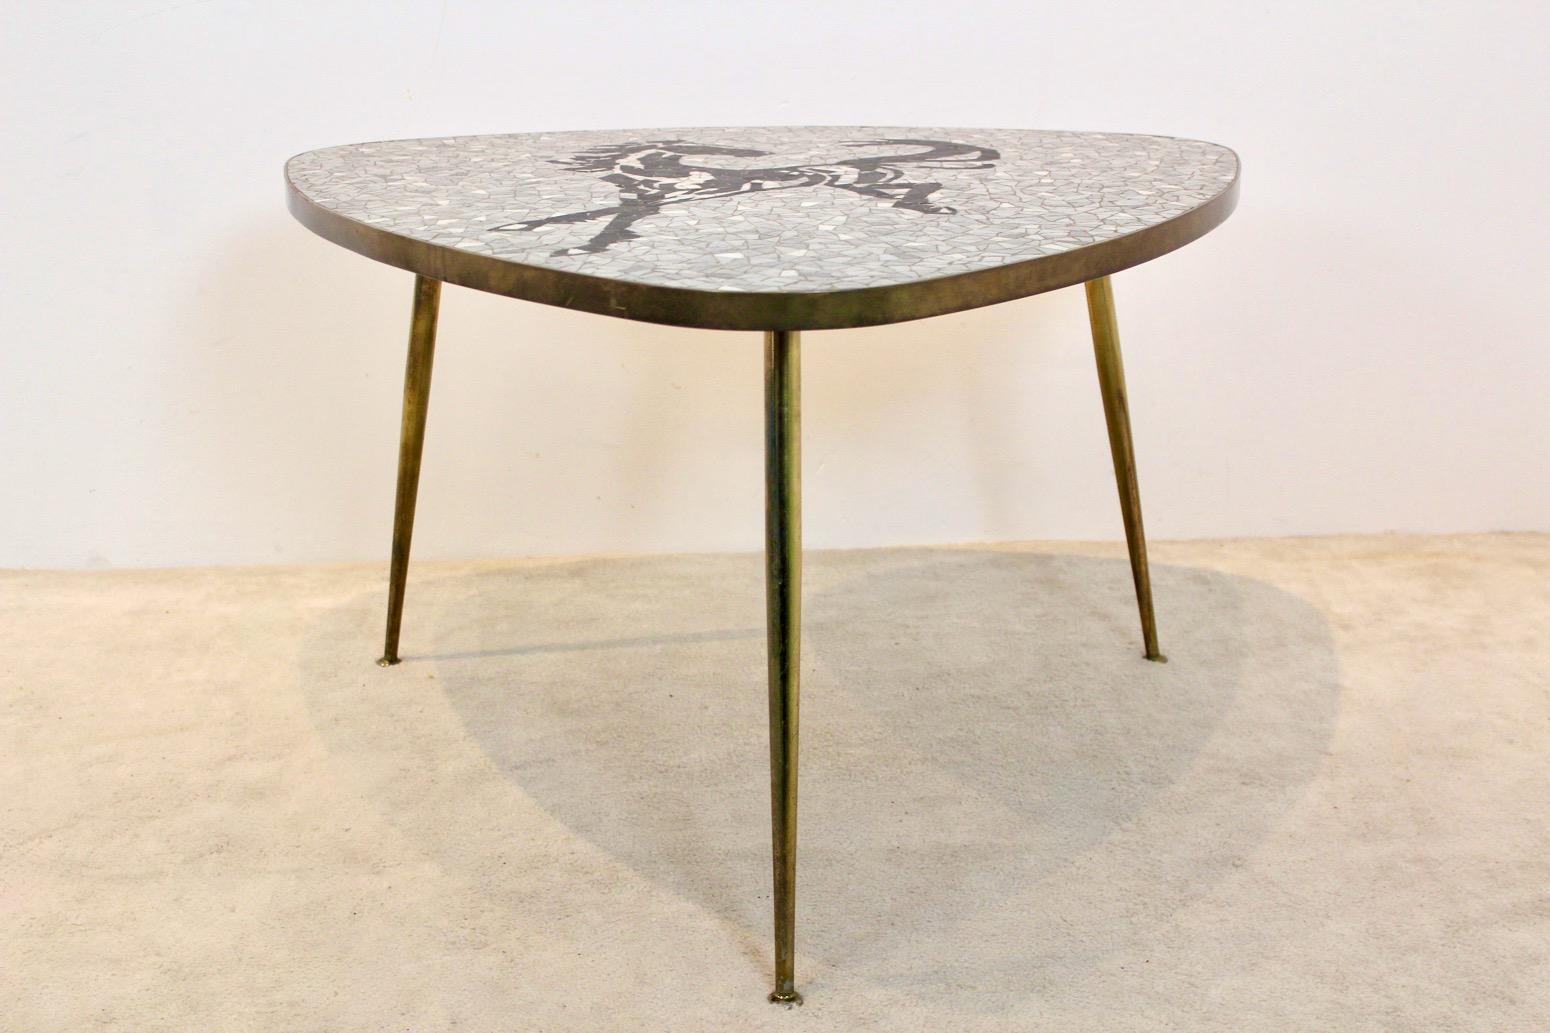 German Exquisite Mosaic and Brass Coffee or Side Table by Berthold Müller, 1960s For Sale